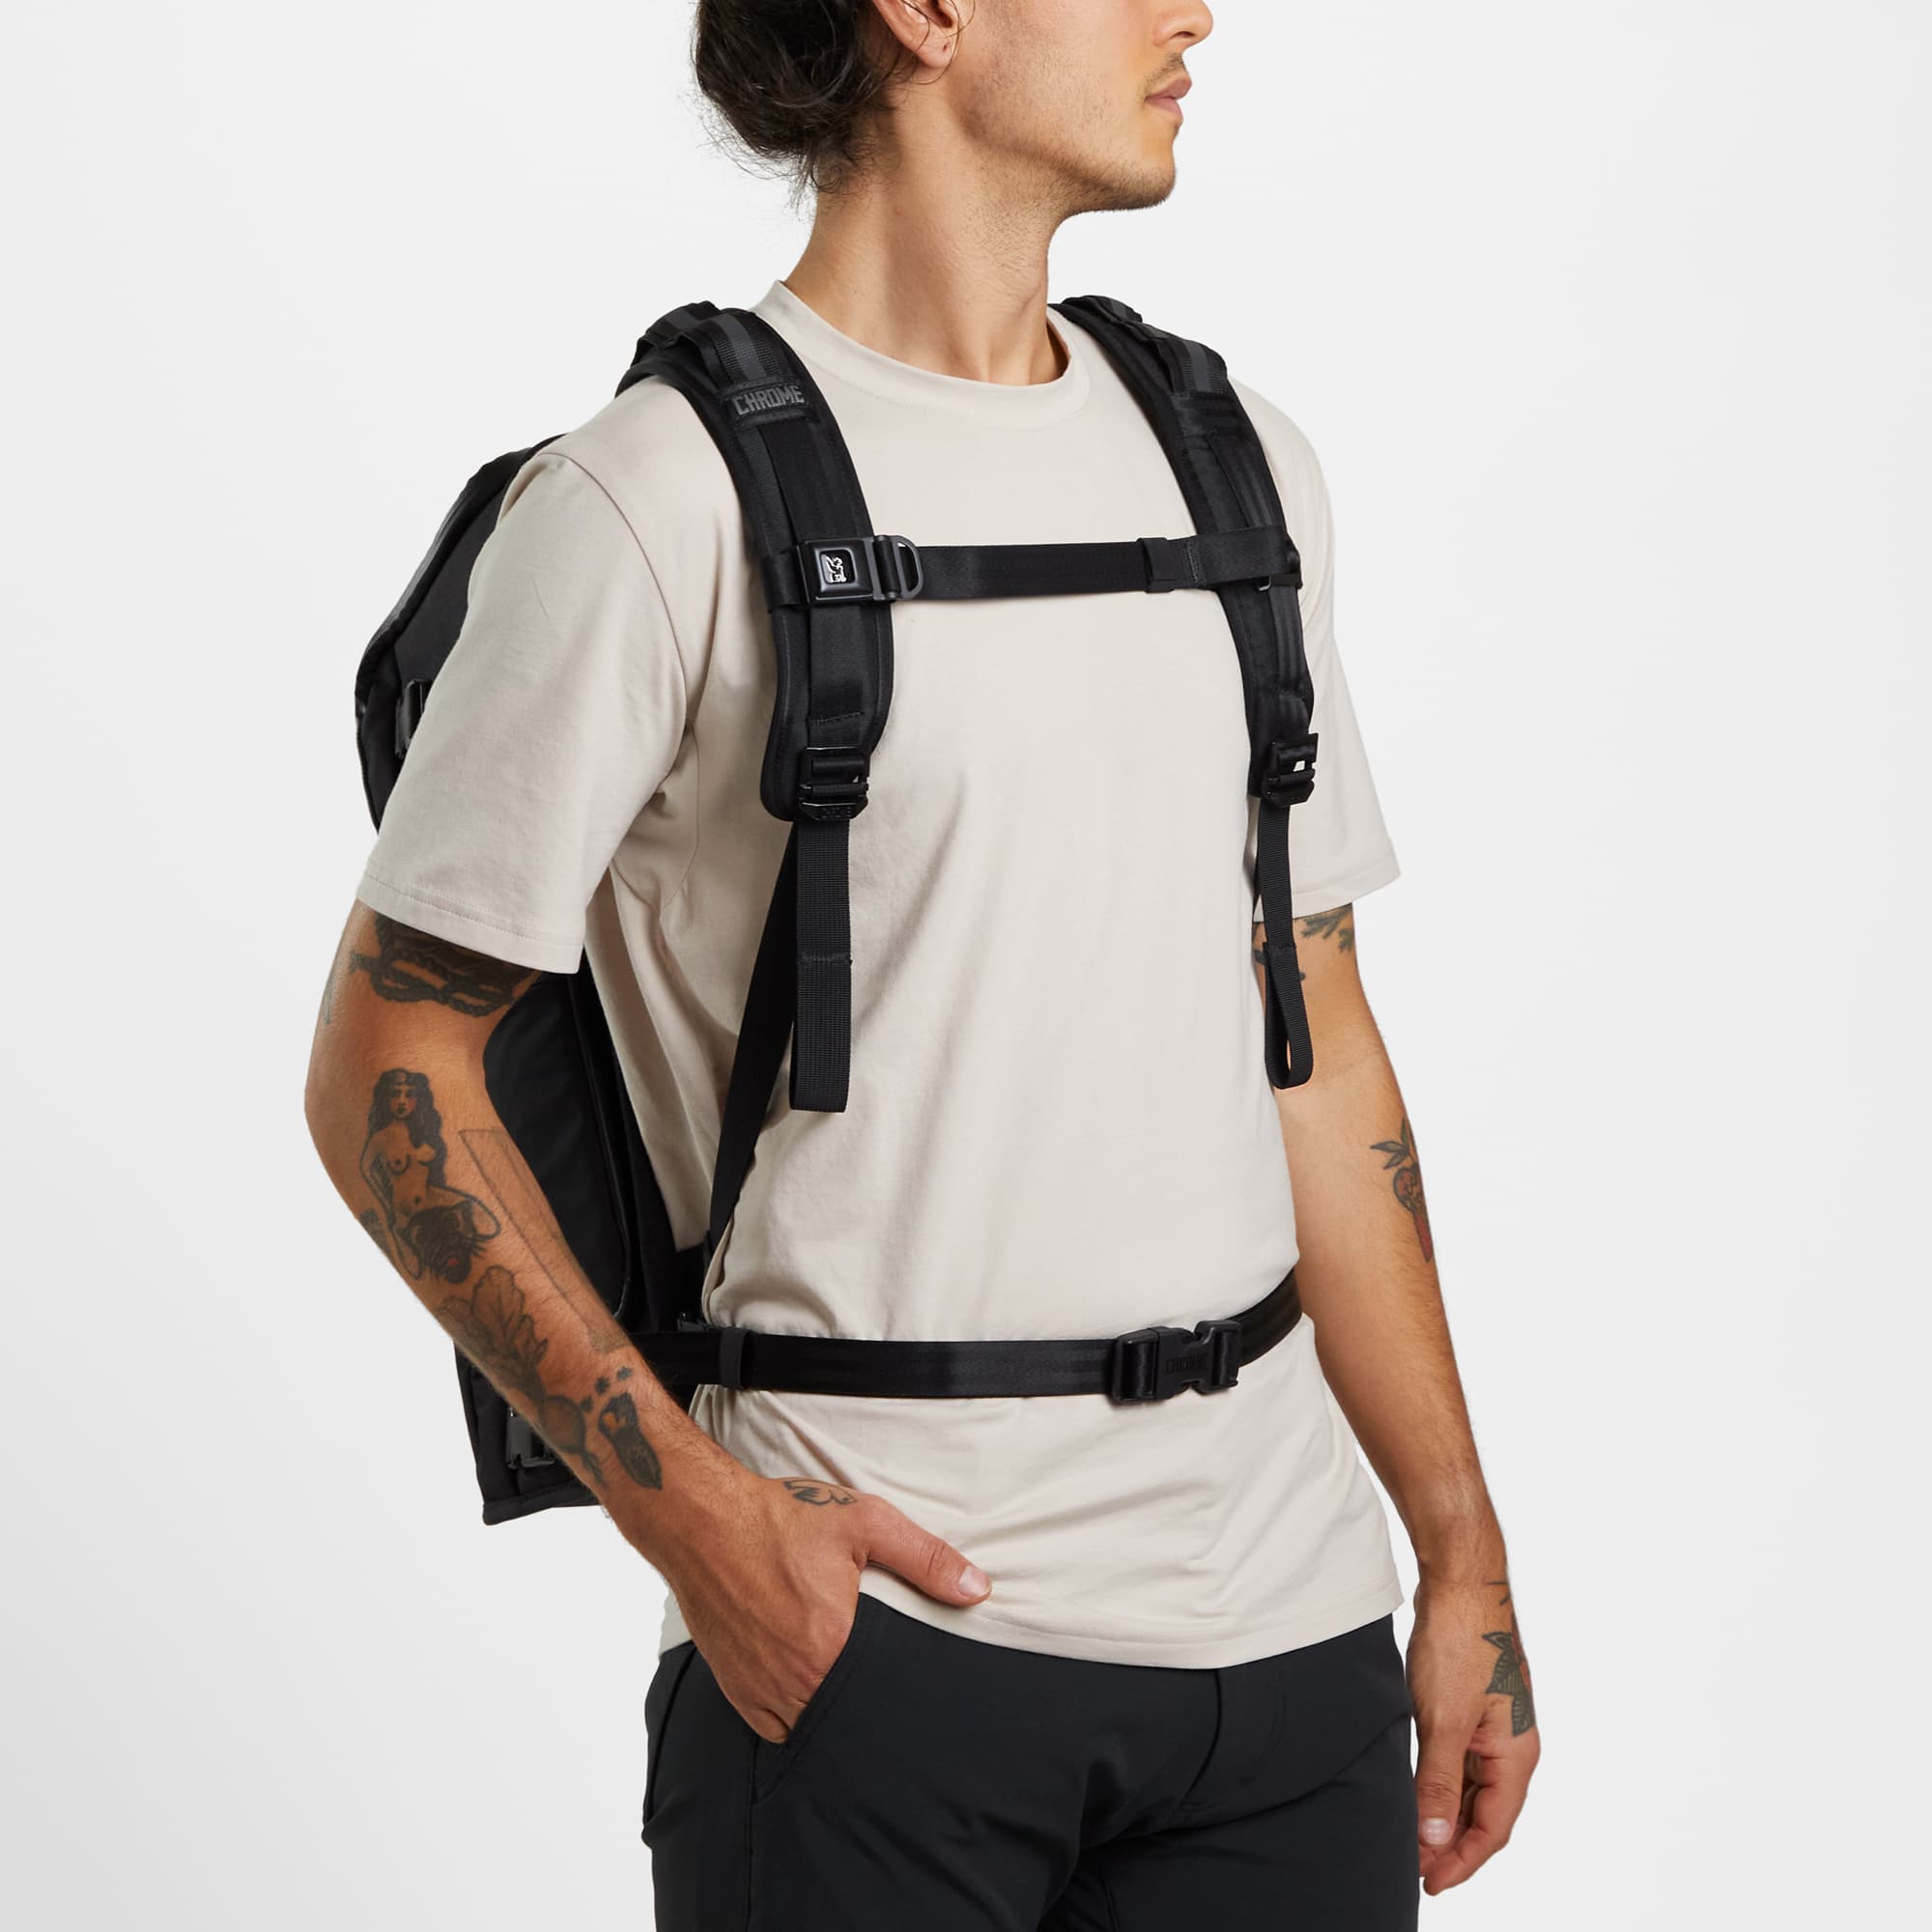 Niko camera tech backpack in black worn by a man